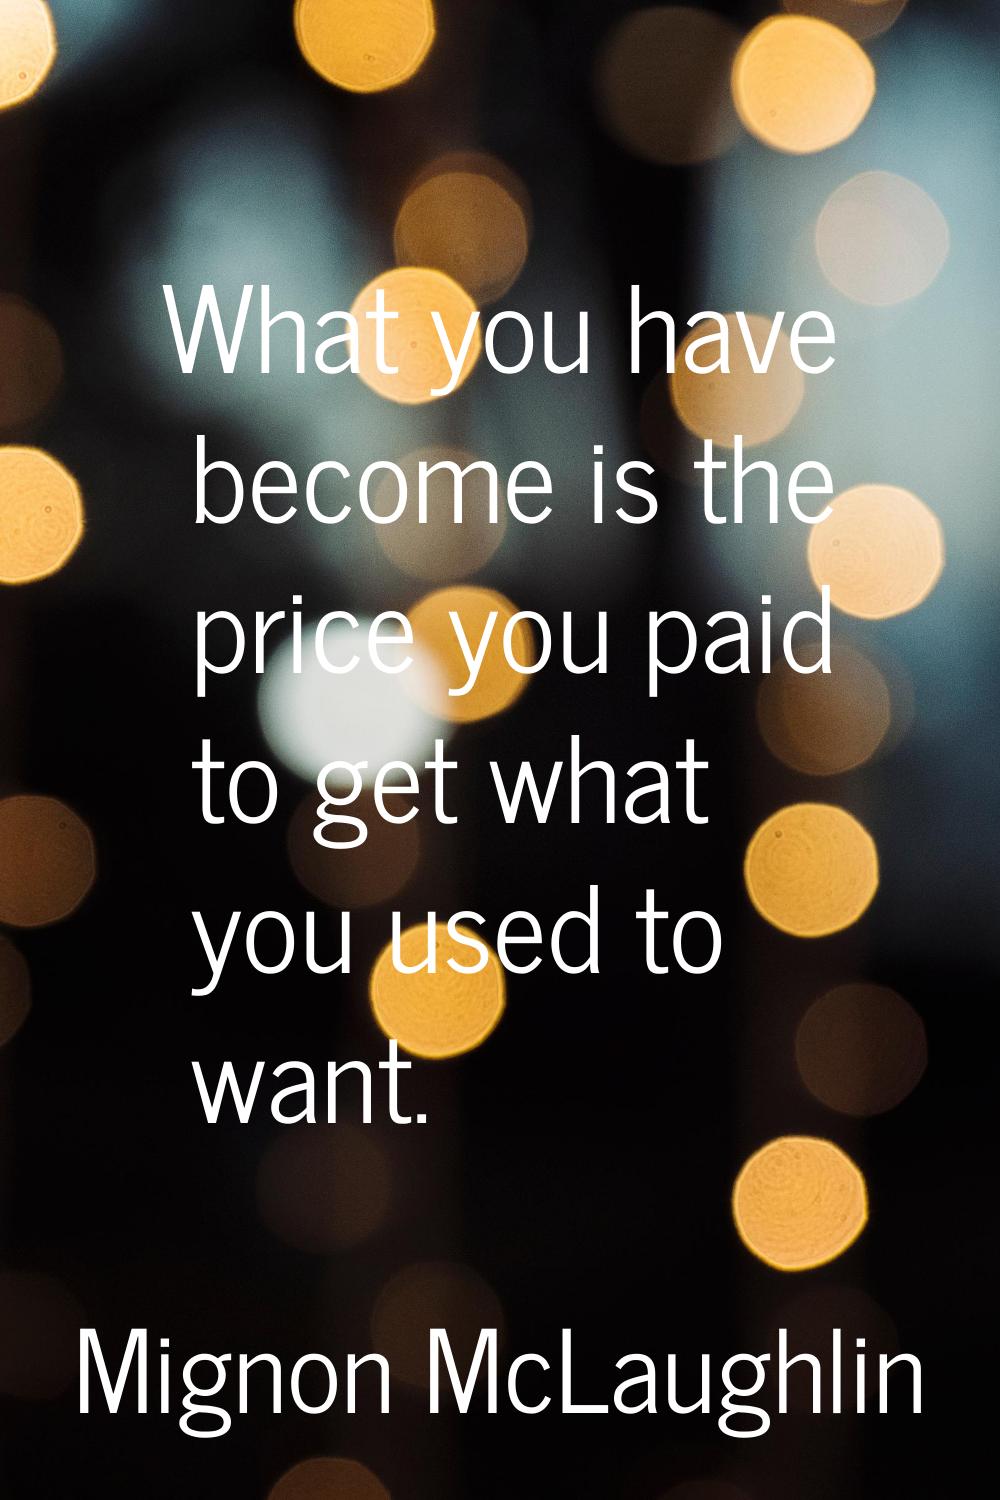 What you have become is the price you paid to get what you used to want.